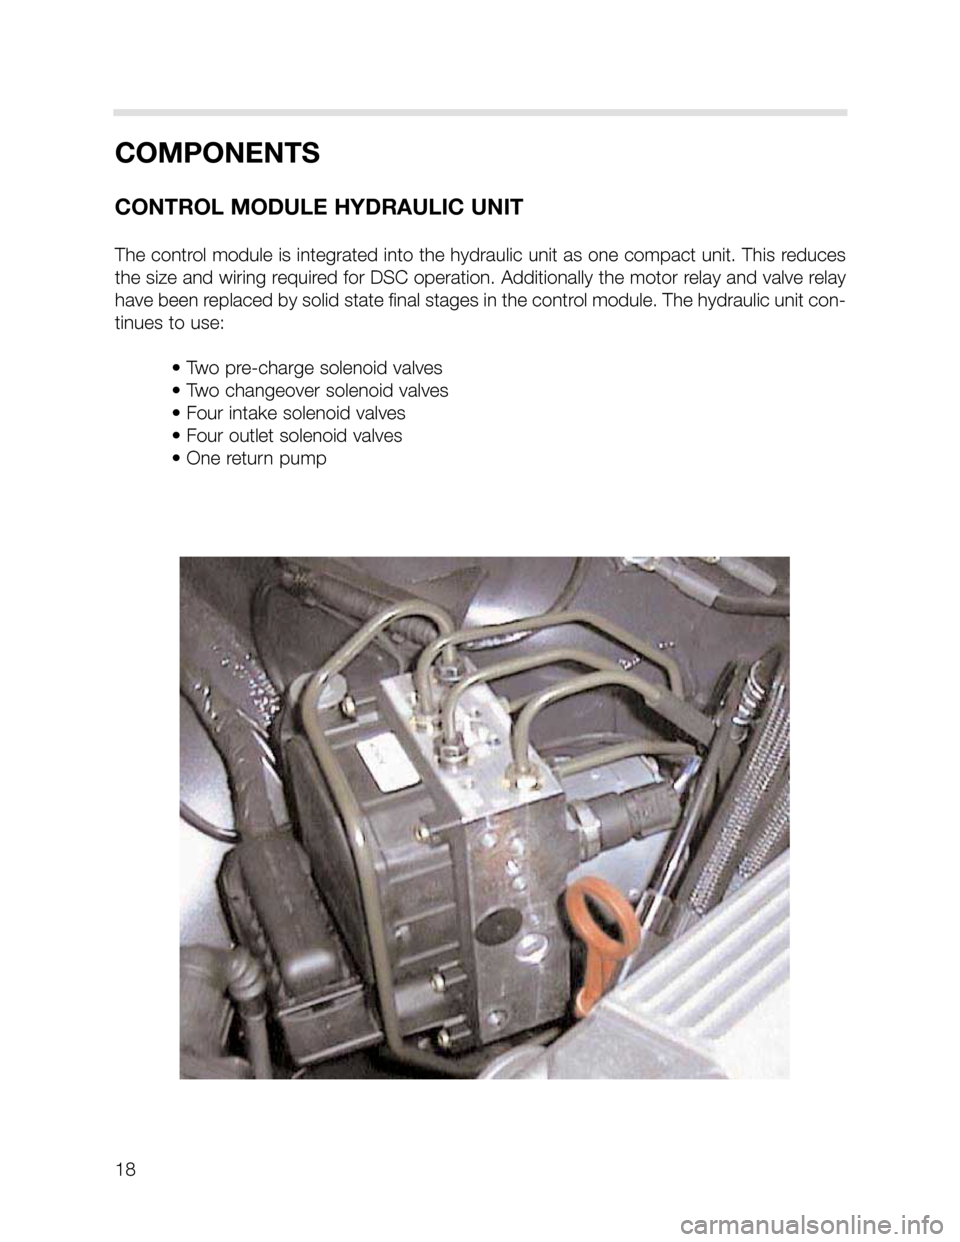 BMW X5 1999 E53 DSC System User Guide 18
COMPONENTS
CONTROL MODULE HYDRAULIC UNIT
The control module is integrated into the hydraulic unit as one compact unit. This reduces
the size and wiring required for DSC operation. Additionally the 